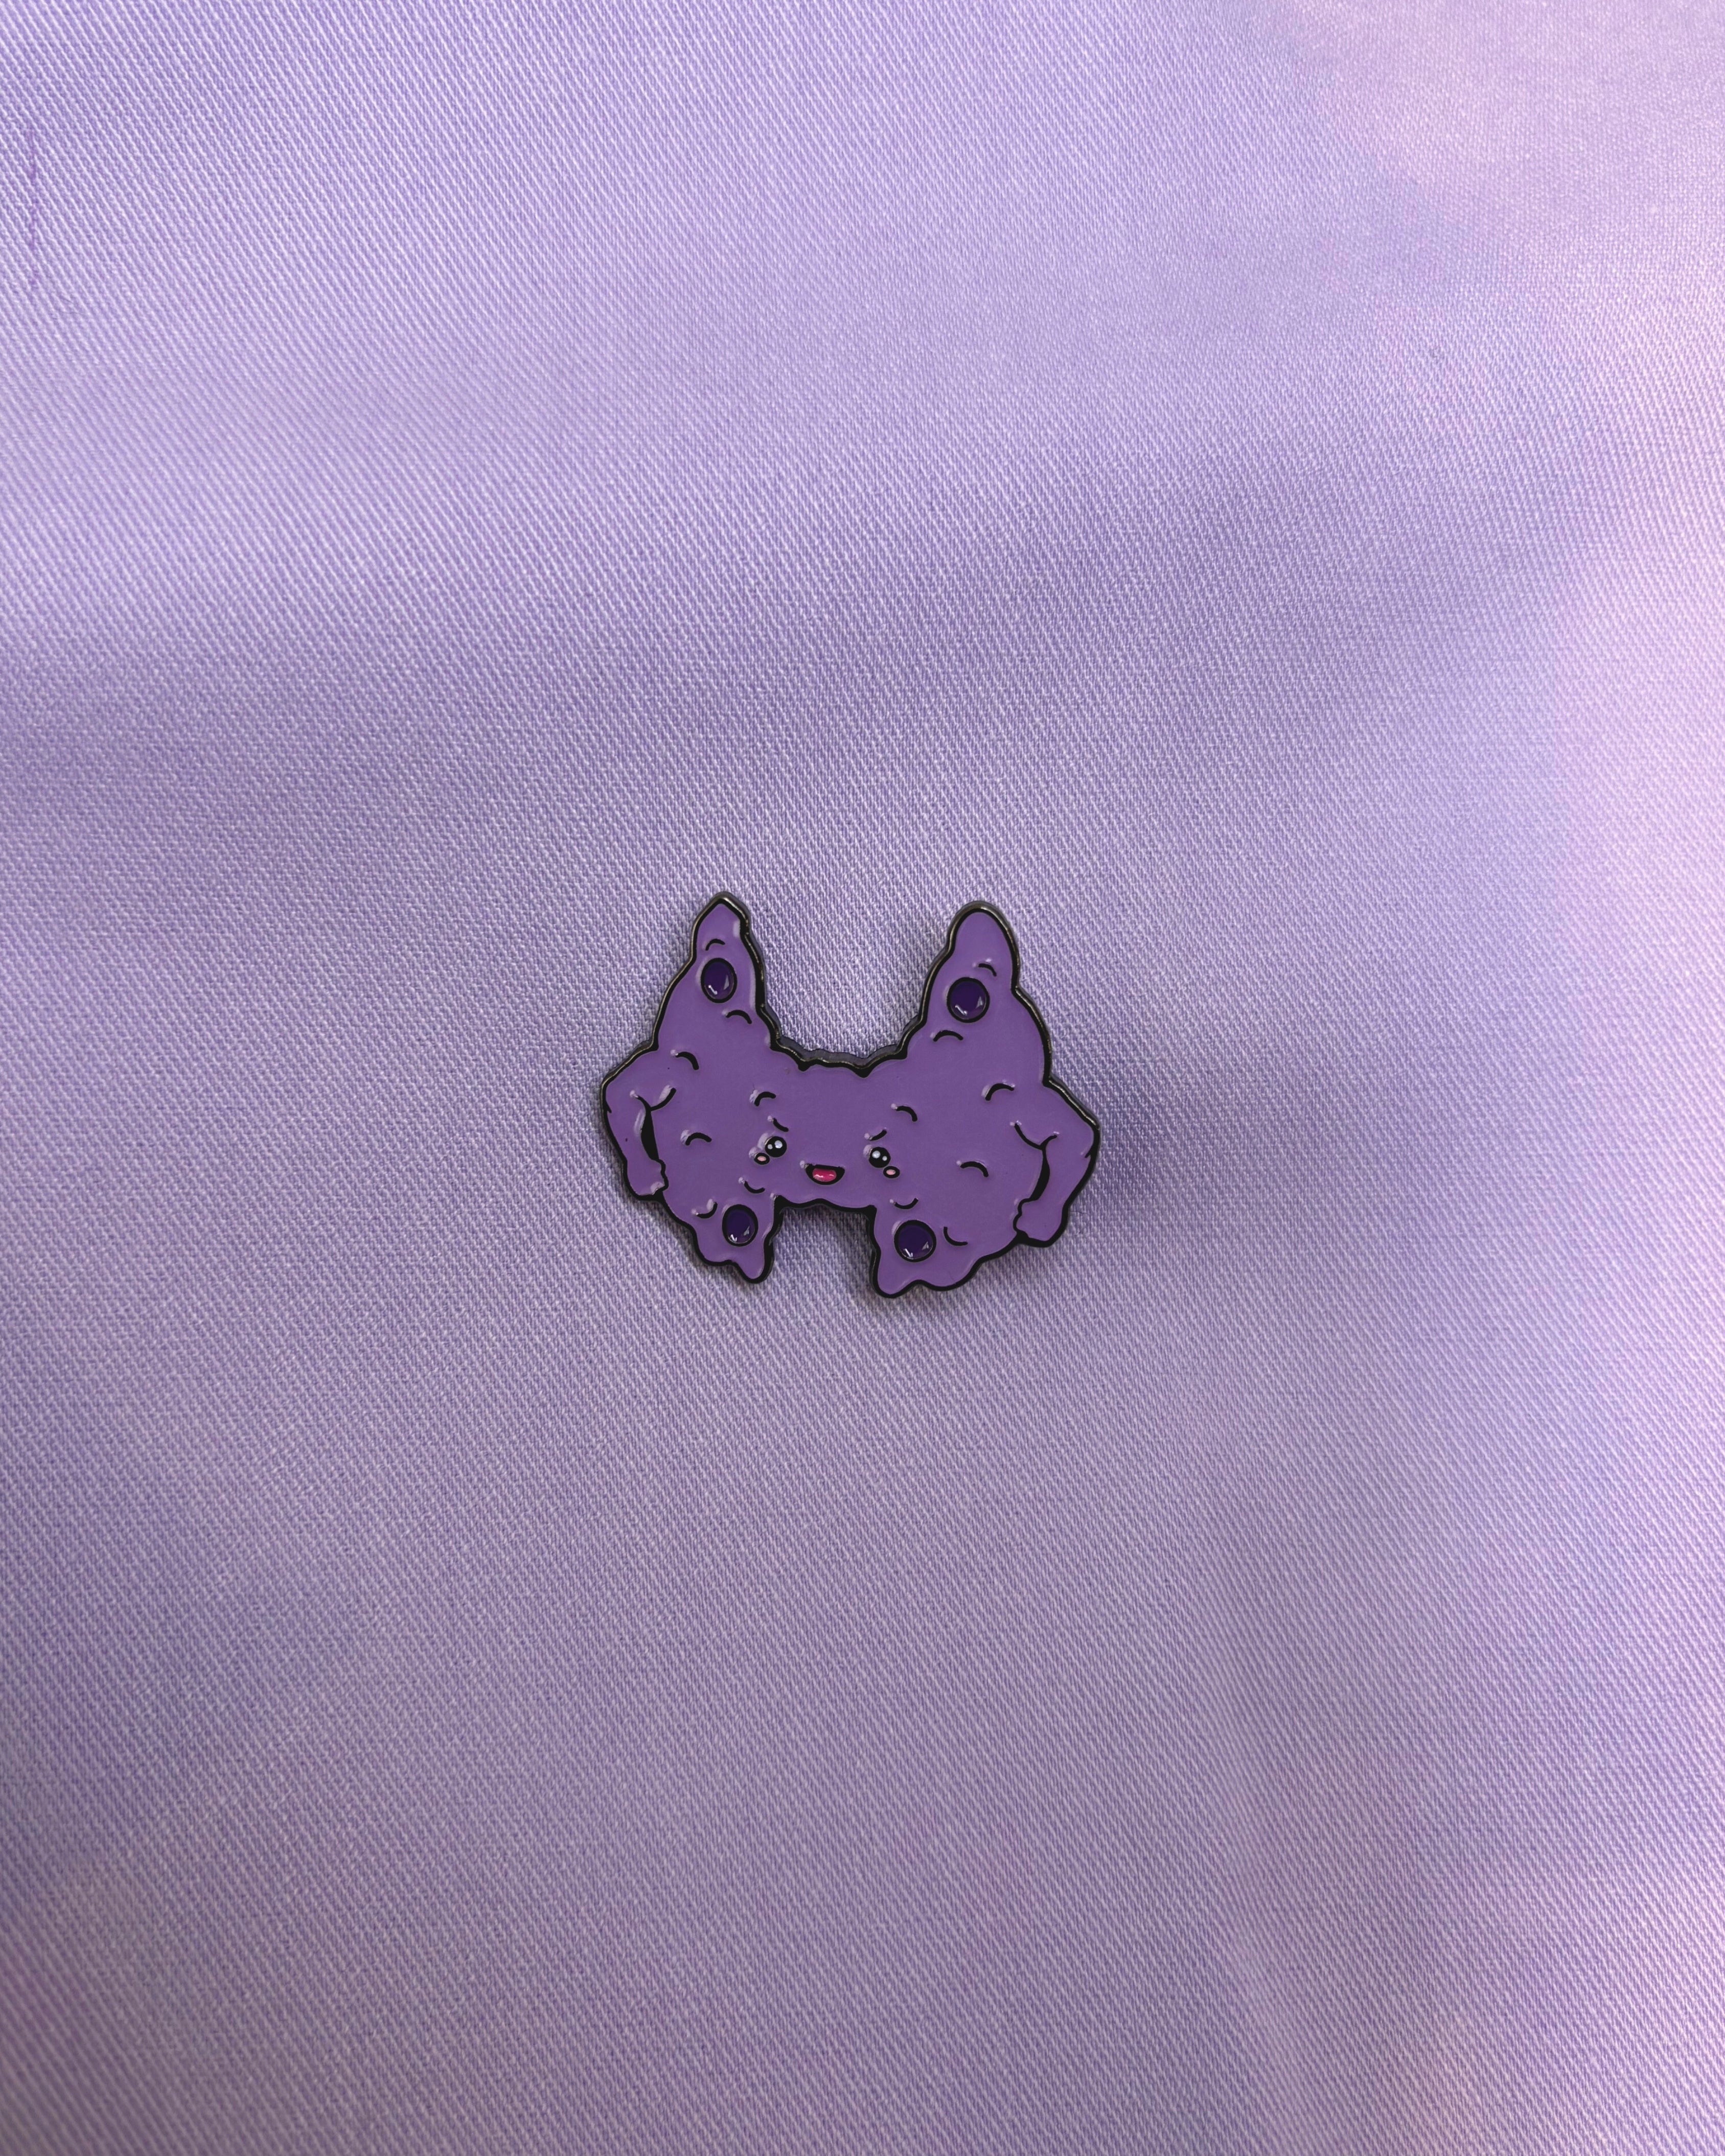 Ty the Thyroid Pin